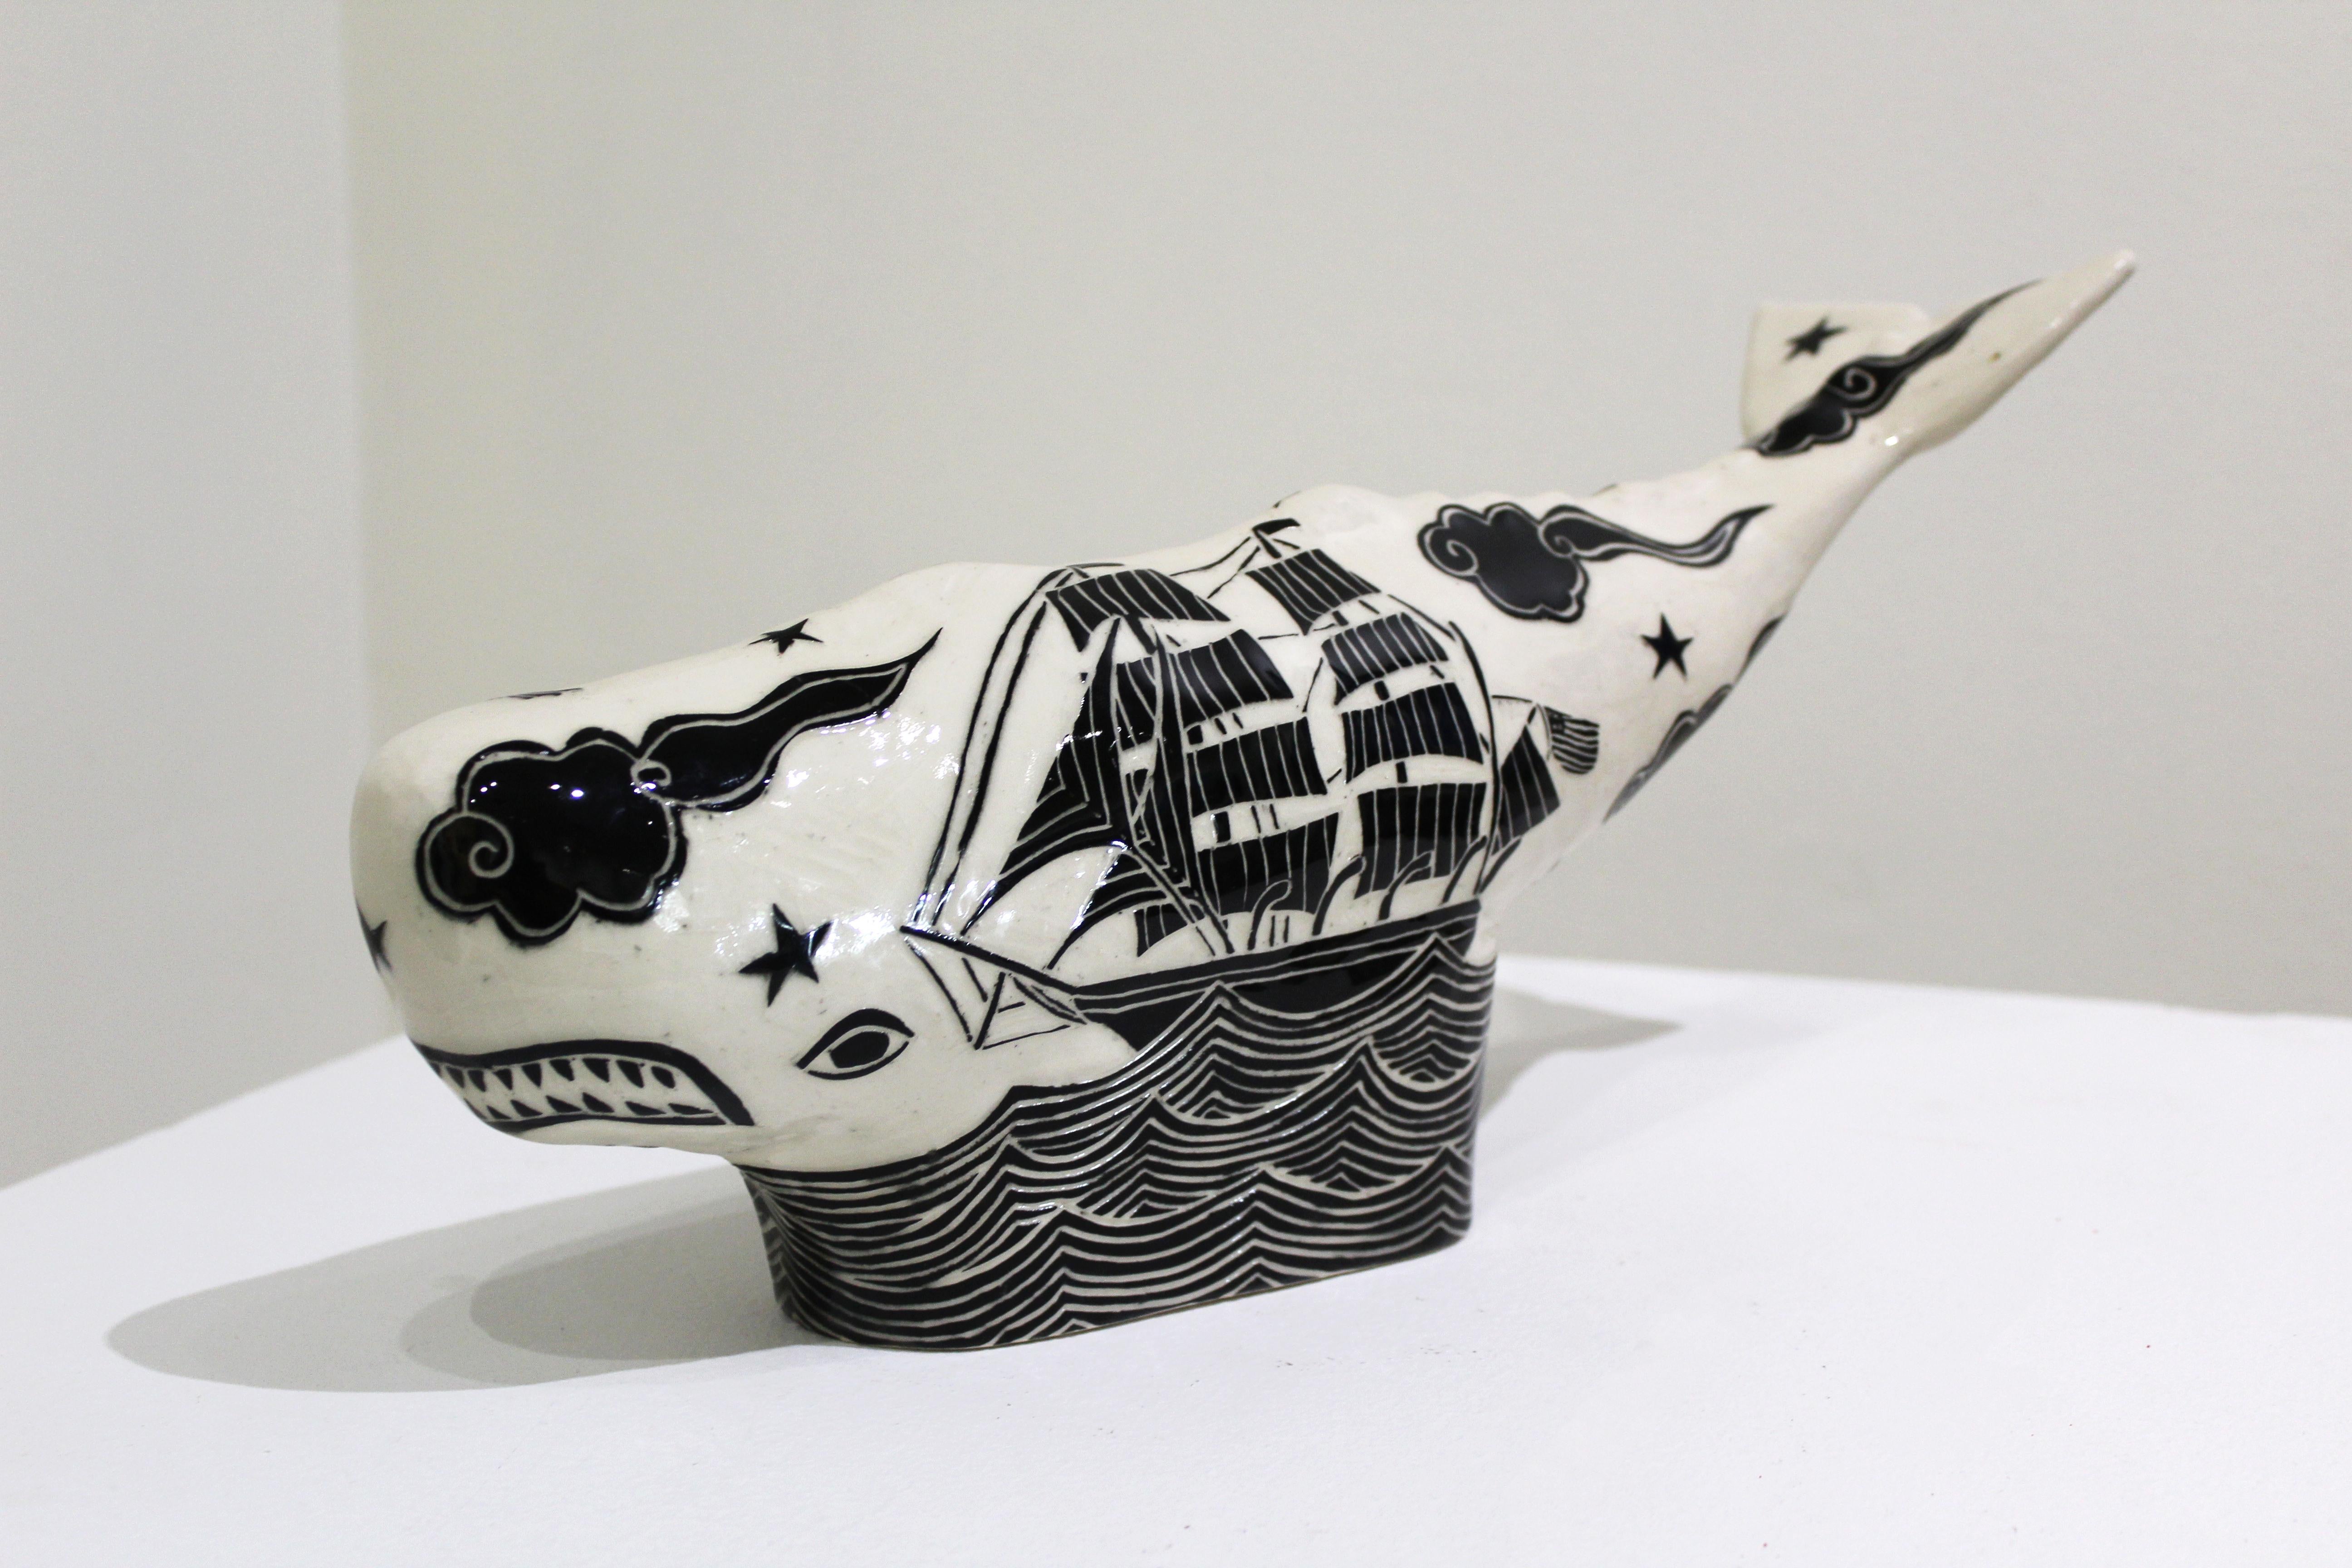 "Whale" with Sea Serpent, carved sgraffito ceramics, black & white, ship - Sculpture by Abbey Kuhe